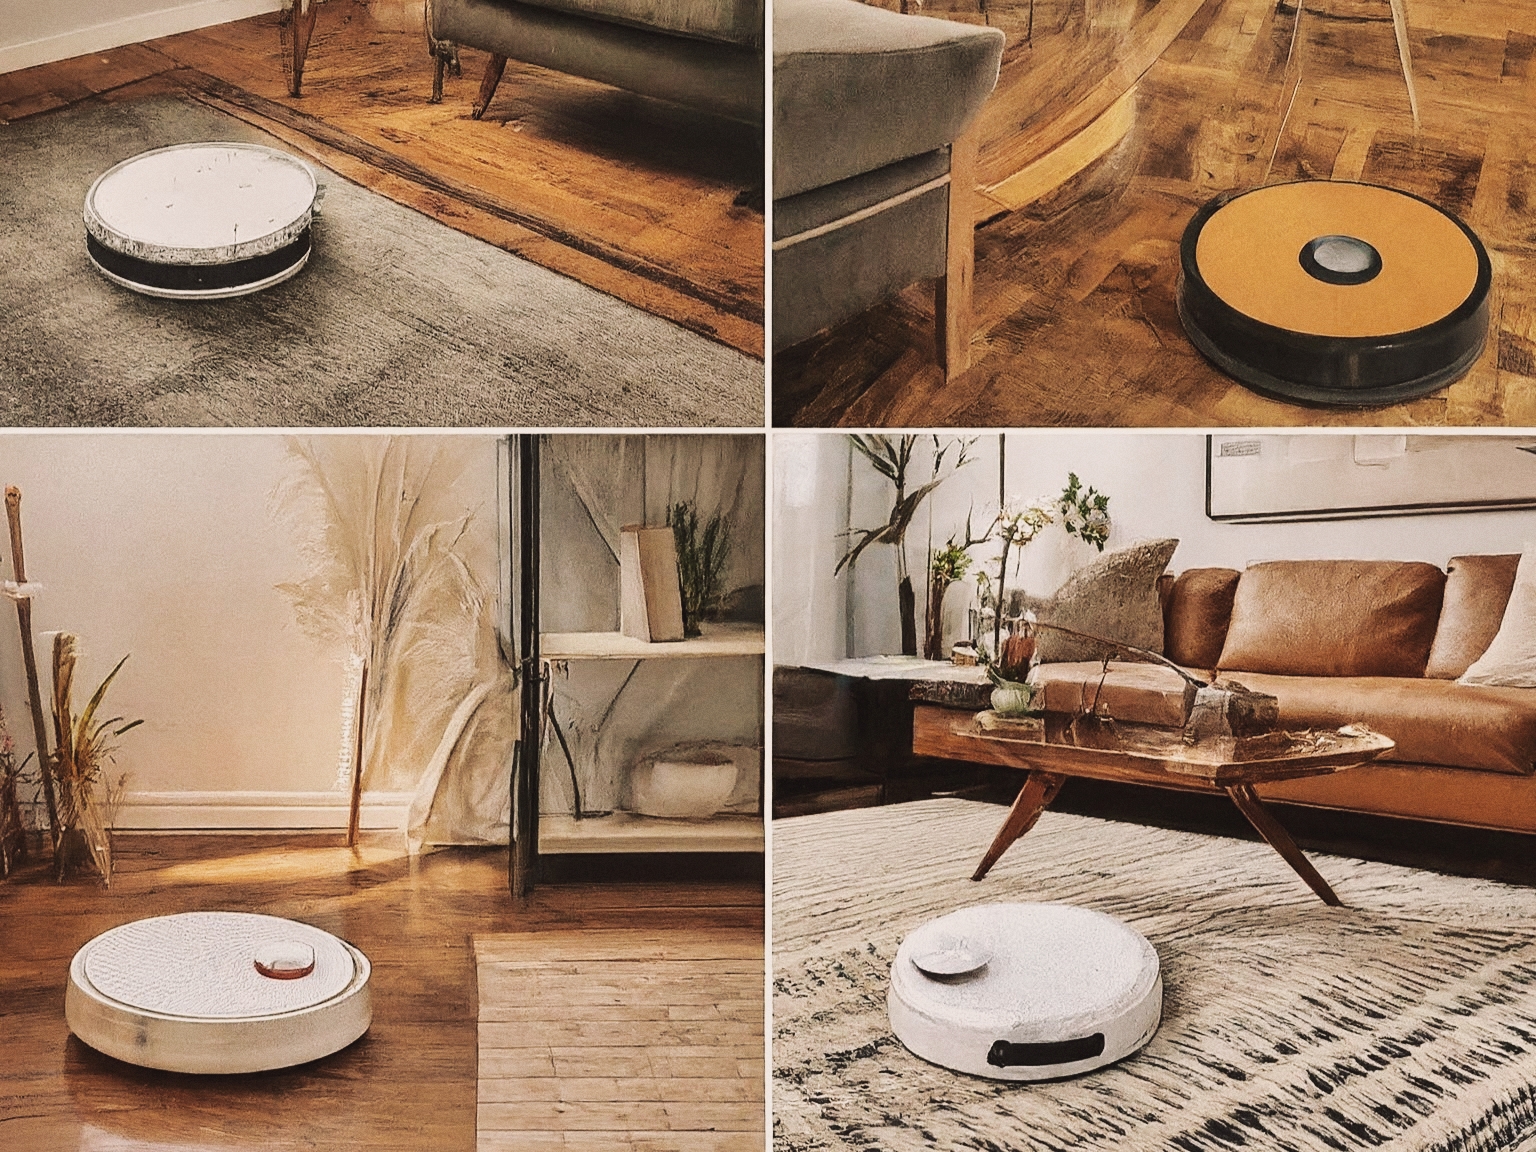 Robot Vacuum Cleaner Cleaning Different Types of Floors